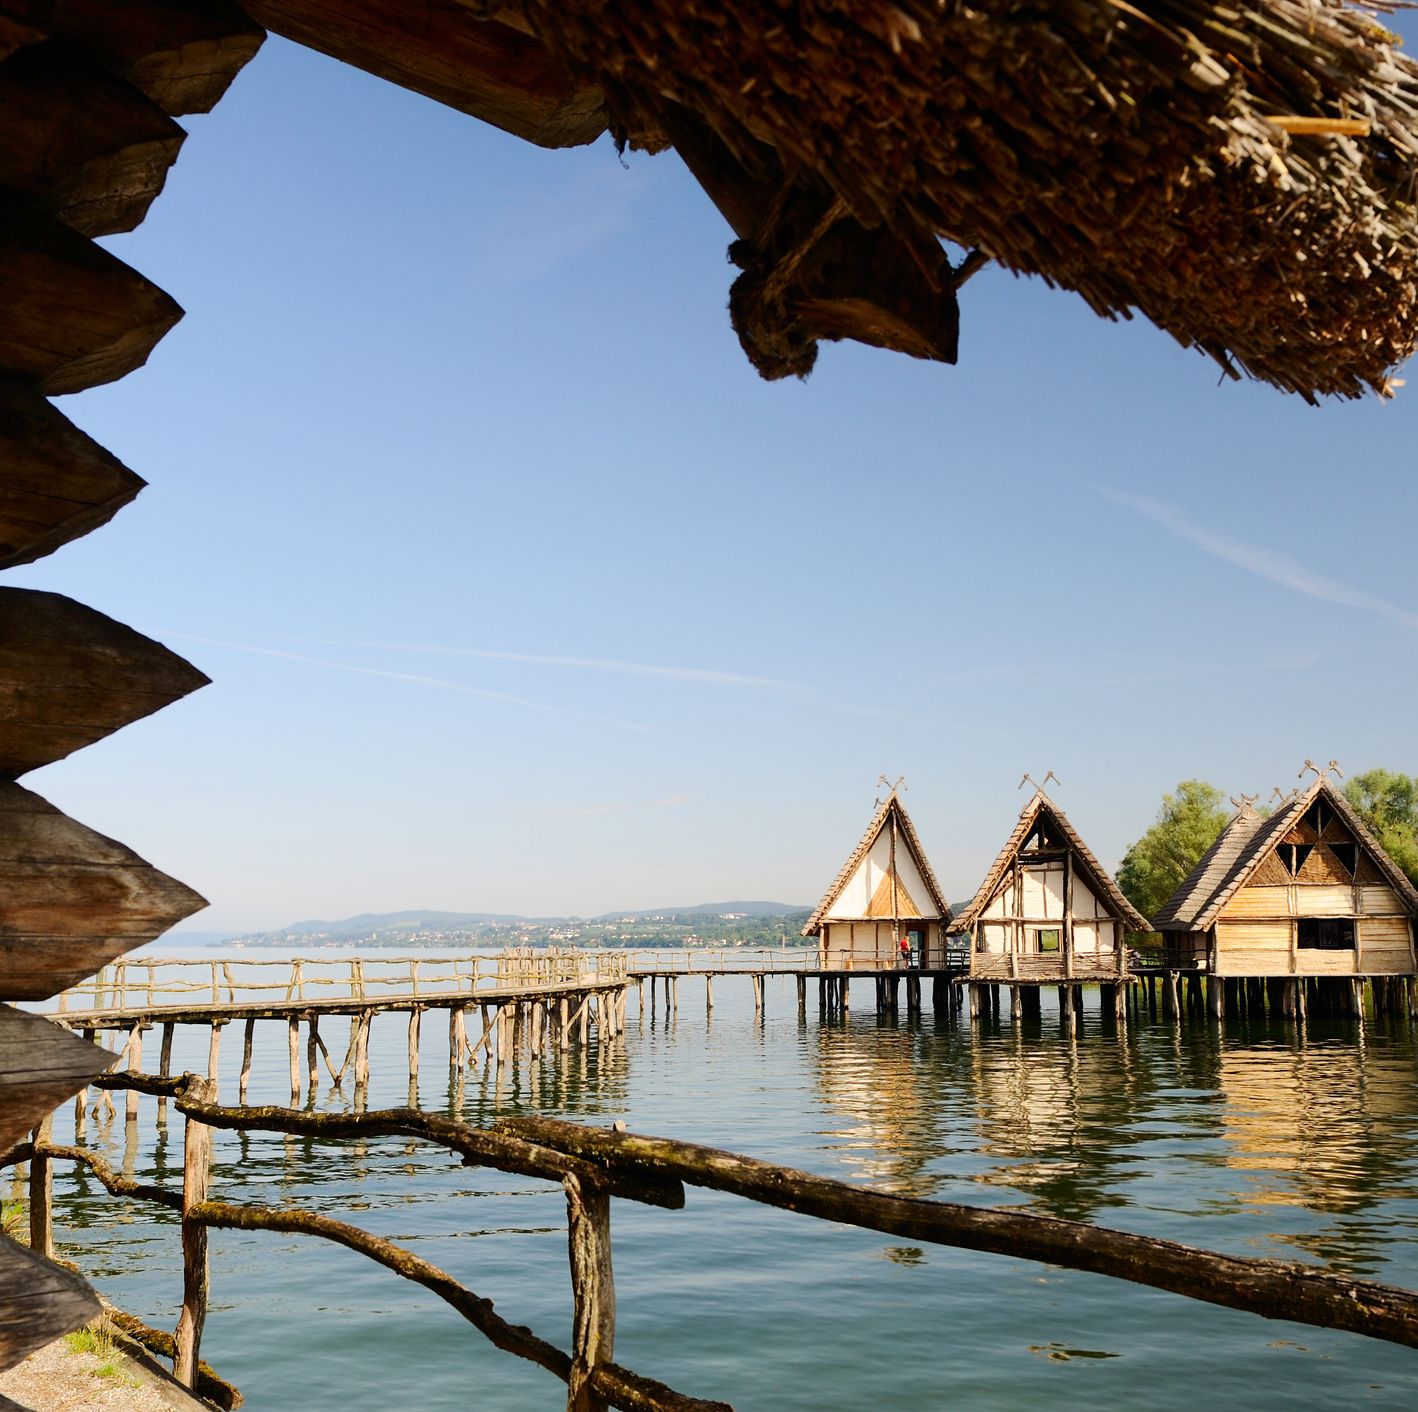 Archaeologists Found an Entire Ancient Village—Built on Stilts!—Under a Lake